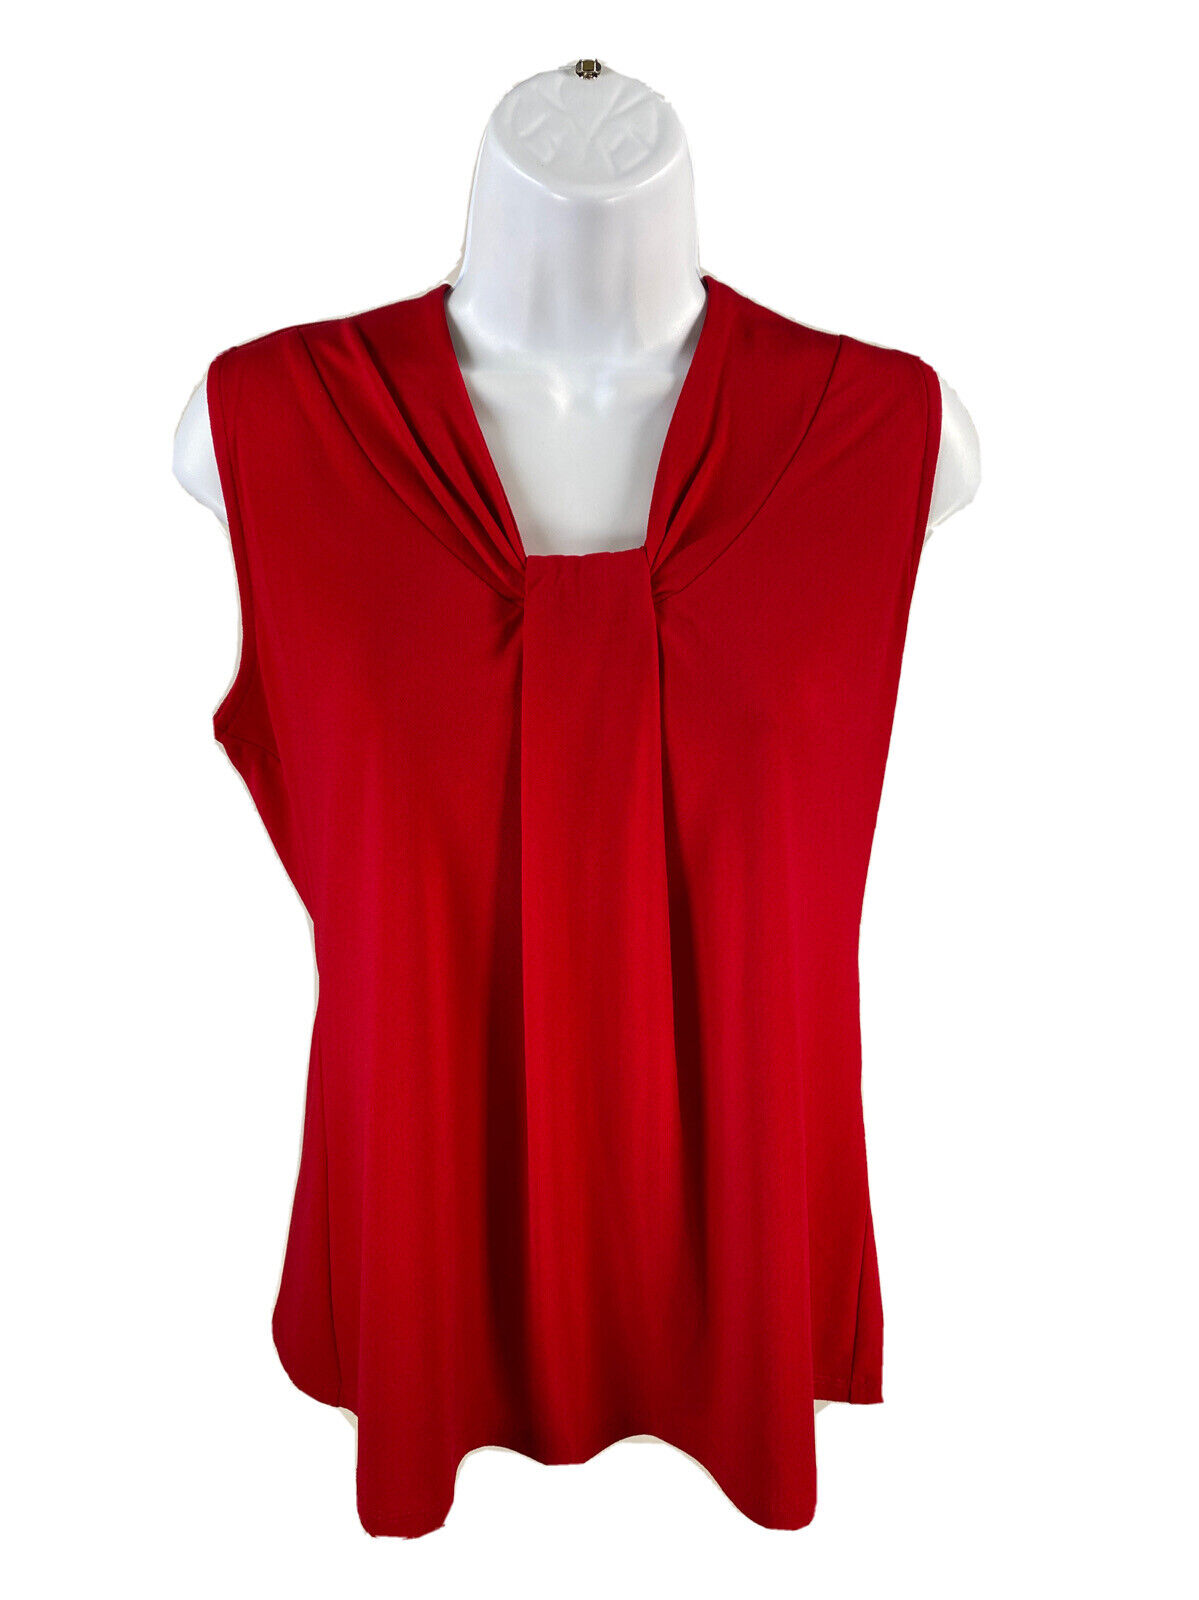 Chico's Women's Red Stretch Sleeveless Top Blouse Sz 0/US S